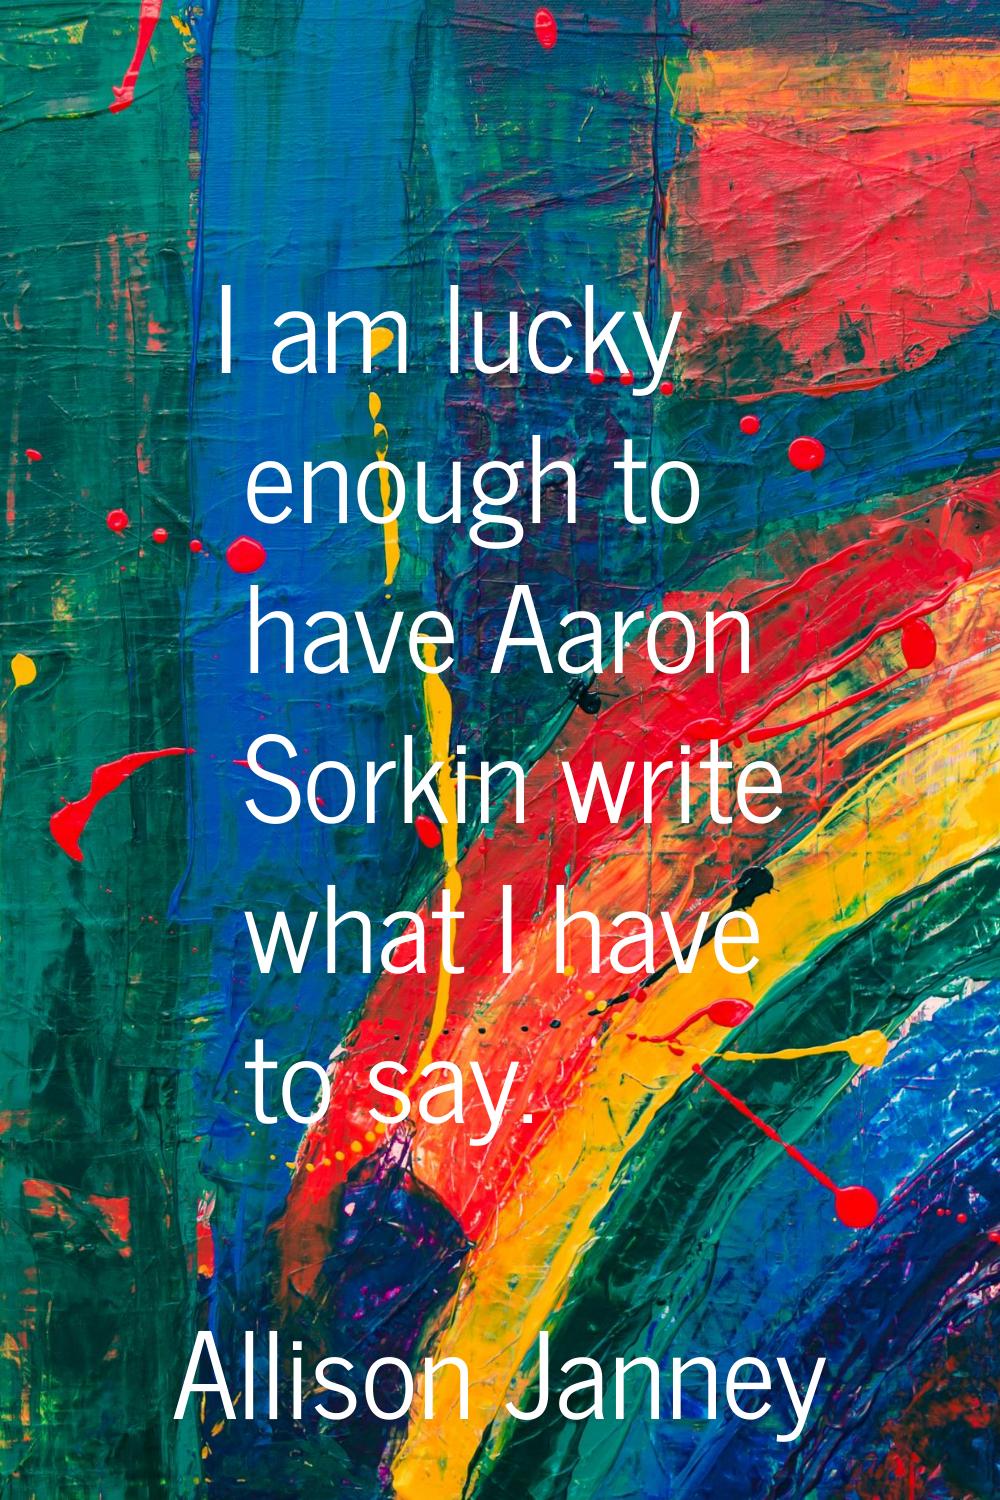 I am lucky enough to have Aaron Sorkin write what I have to say.